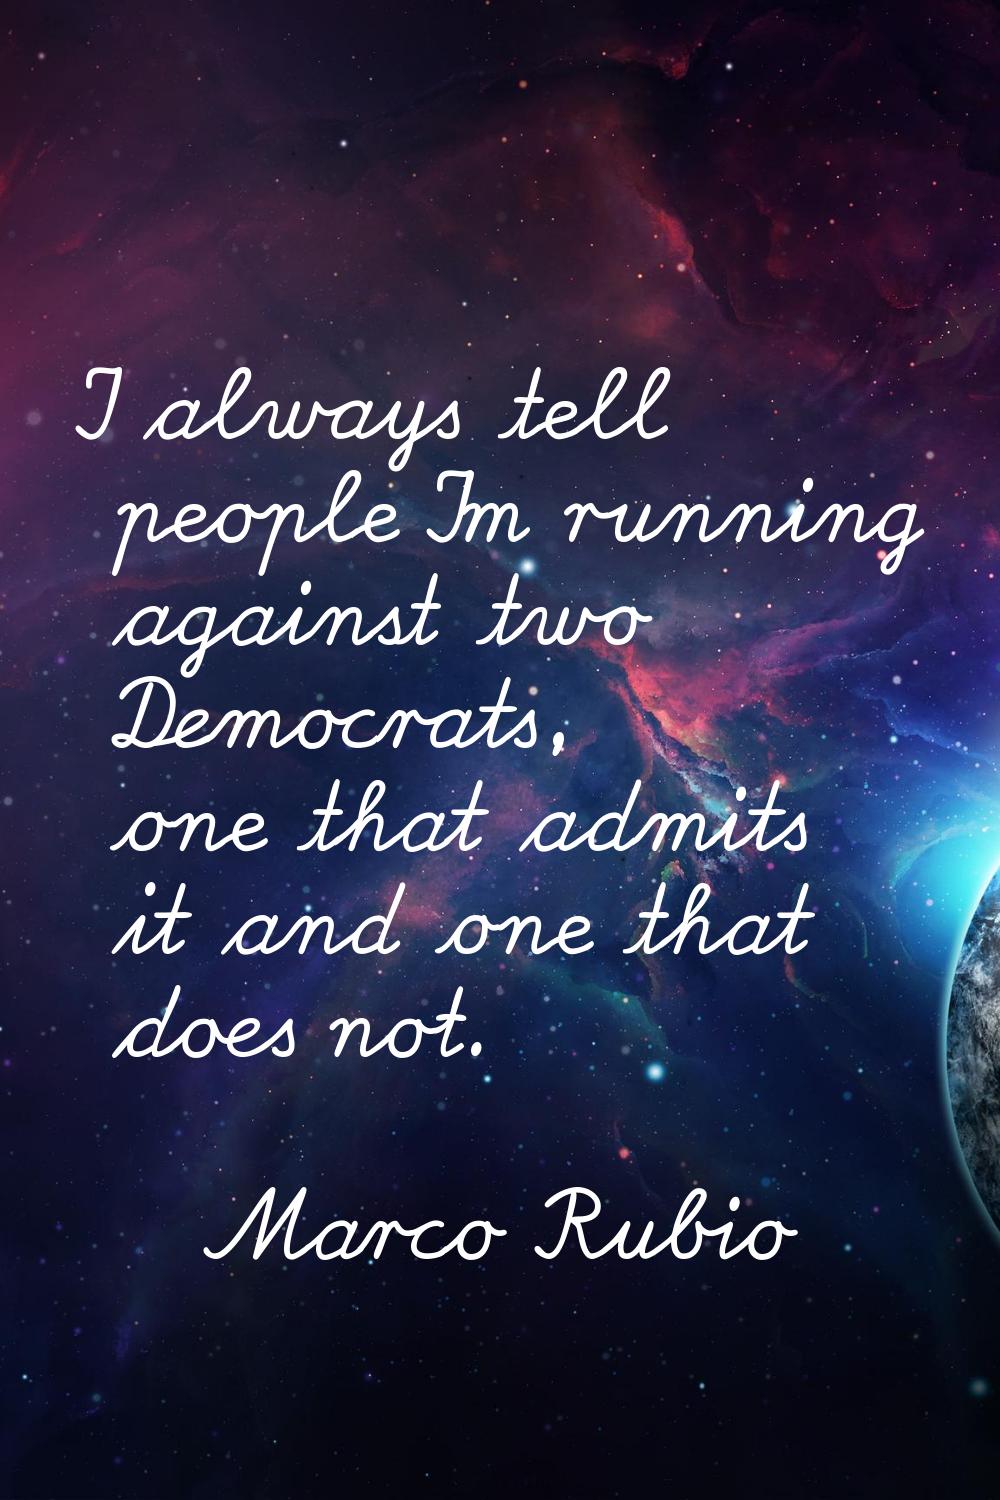 I always tell people I'm running against two Democrats, one that admits it and one that does not.